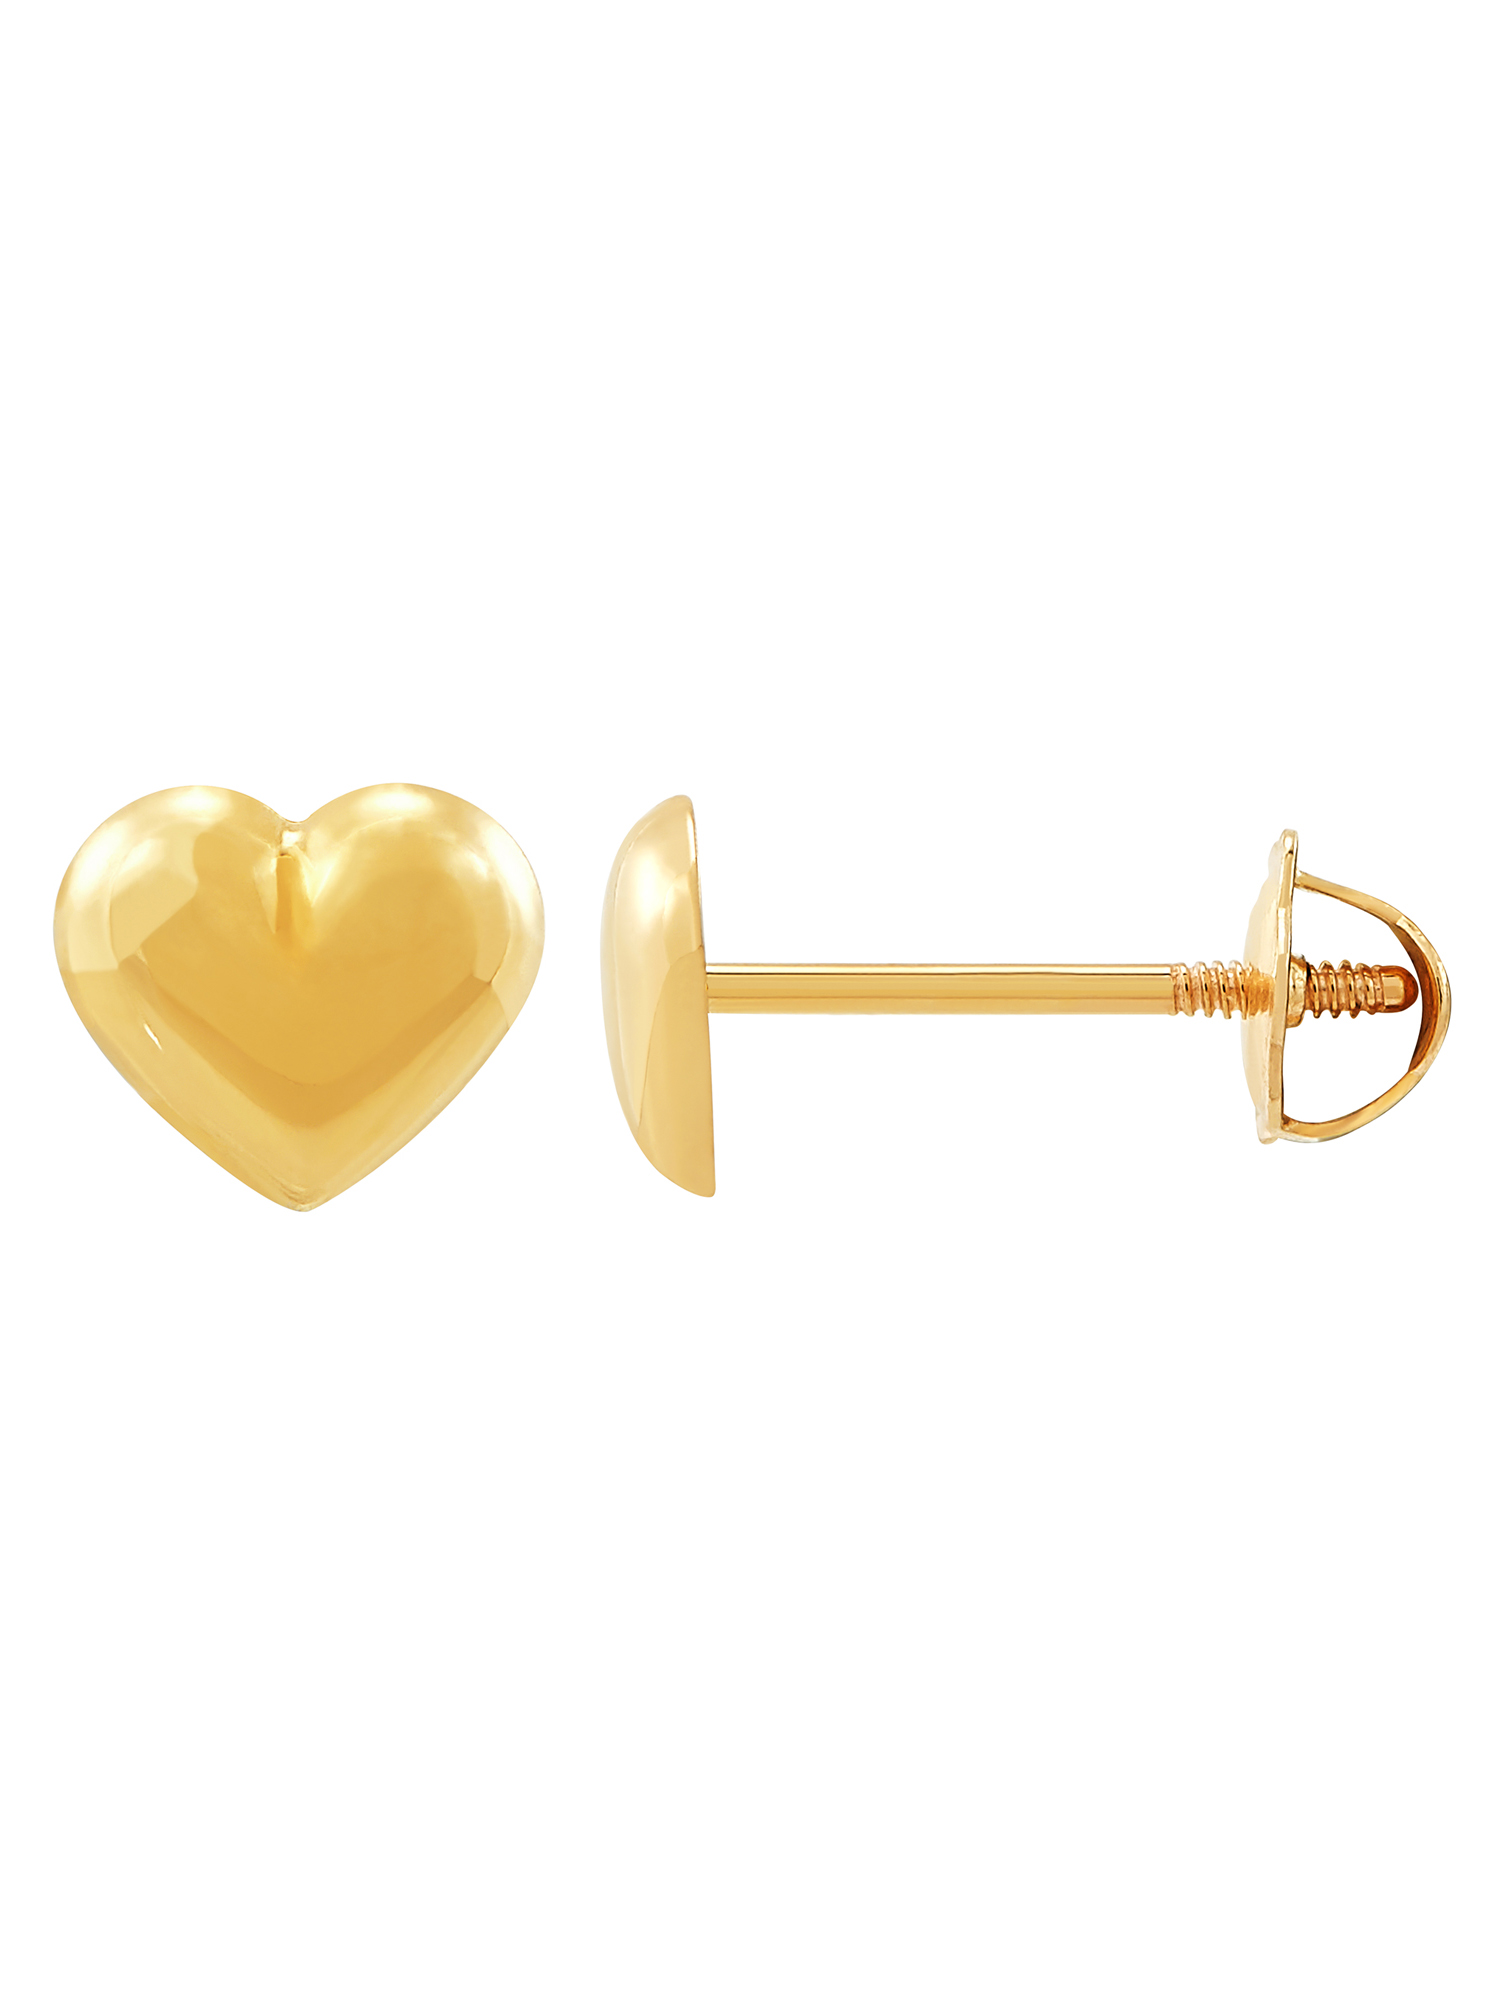 Brilliance Fine Jewelry 10K Yellow Gold Puffed Heart Stud with Safety Screw Back Earrings - image 1 of 4